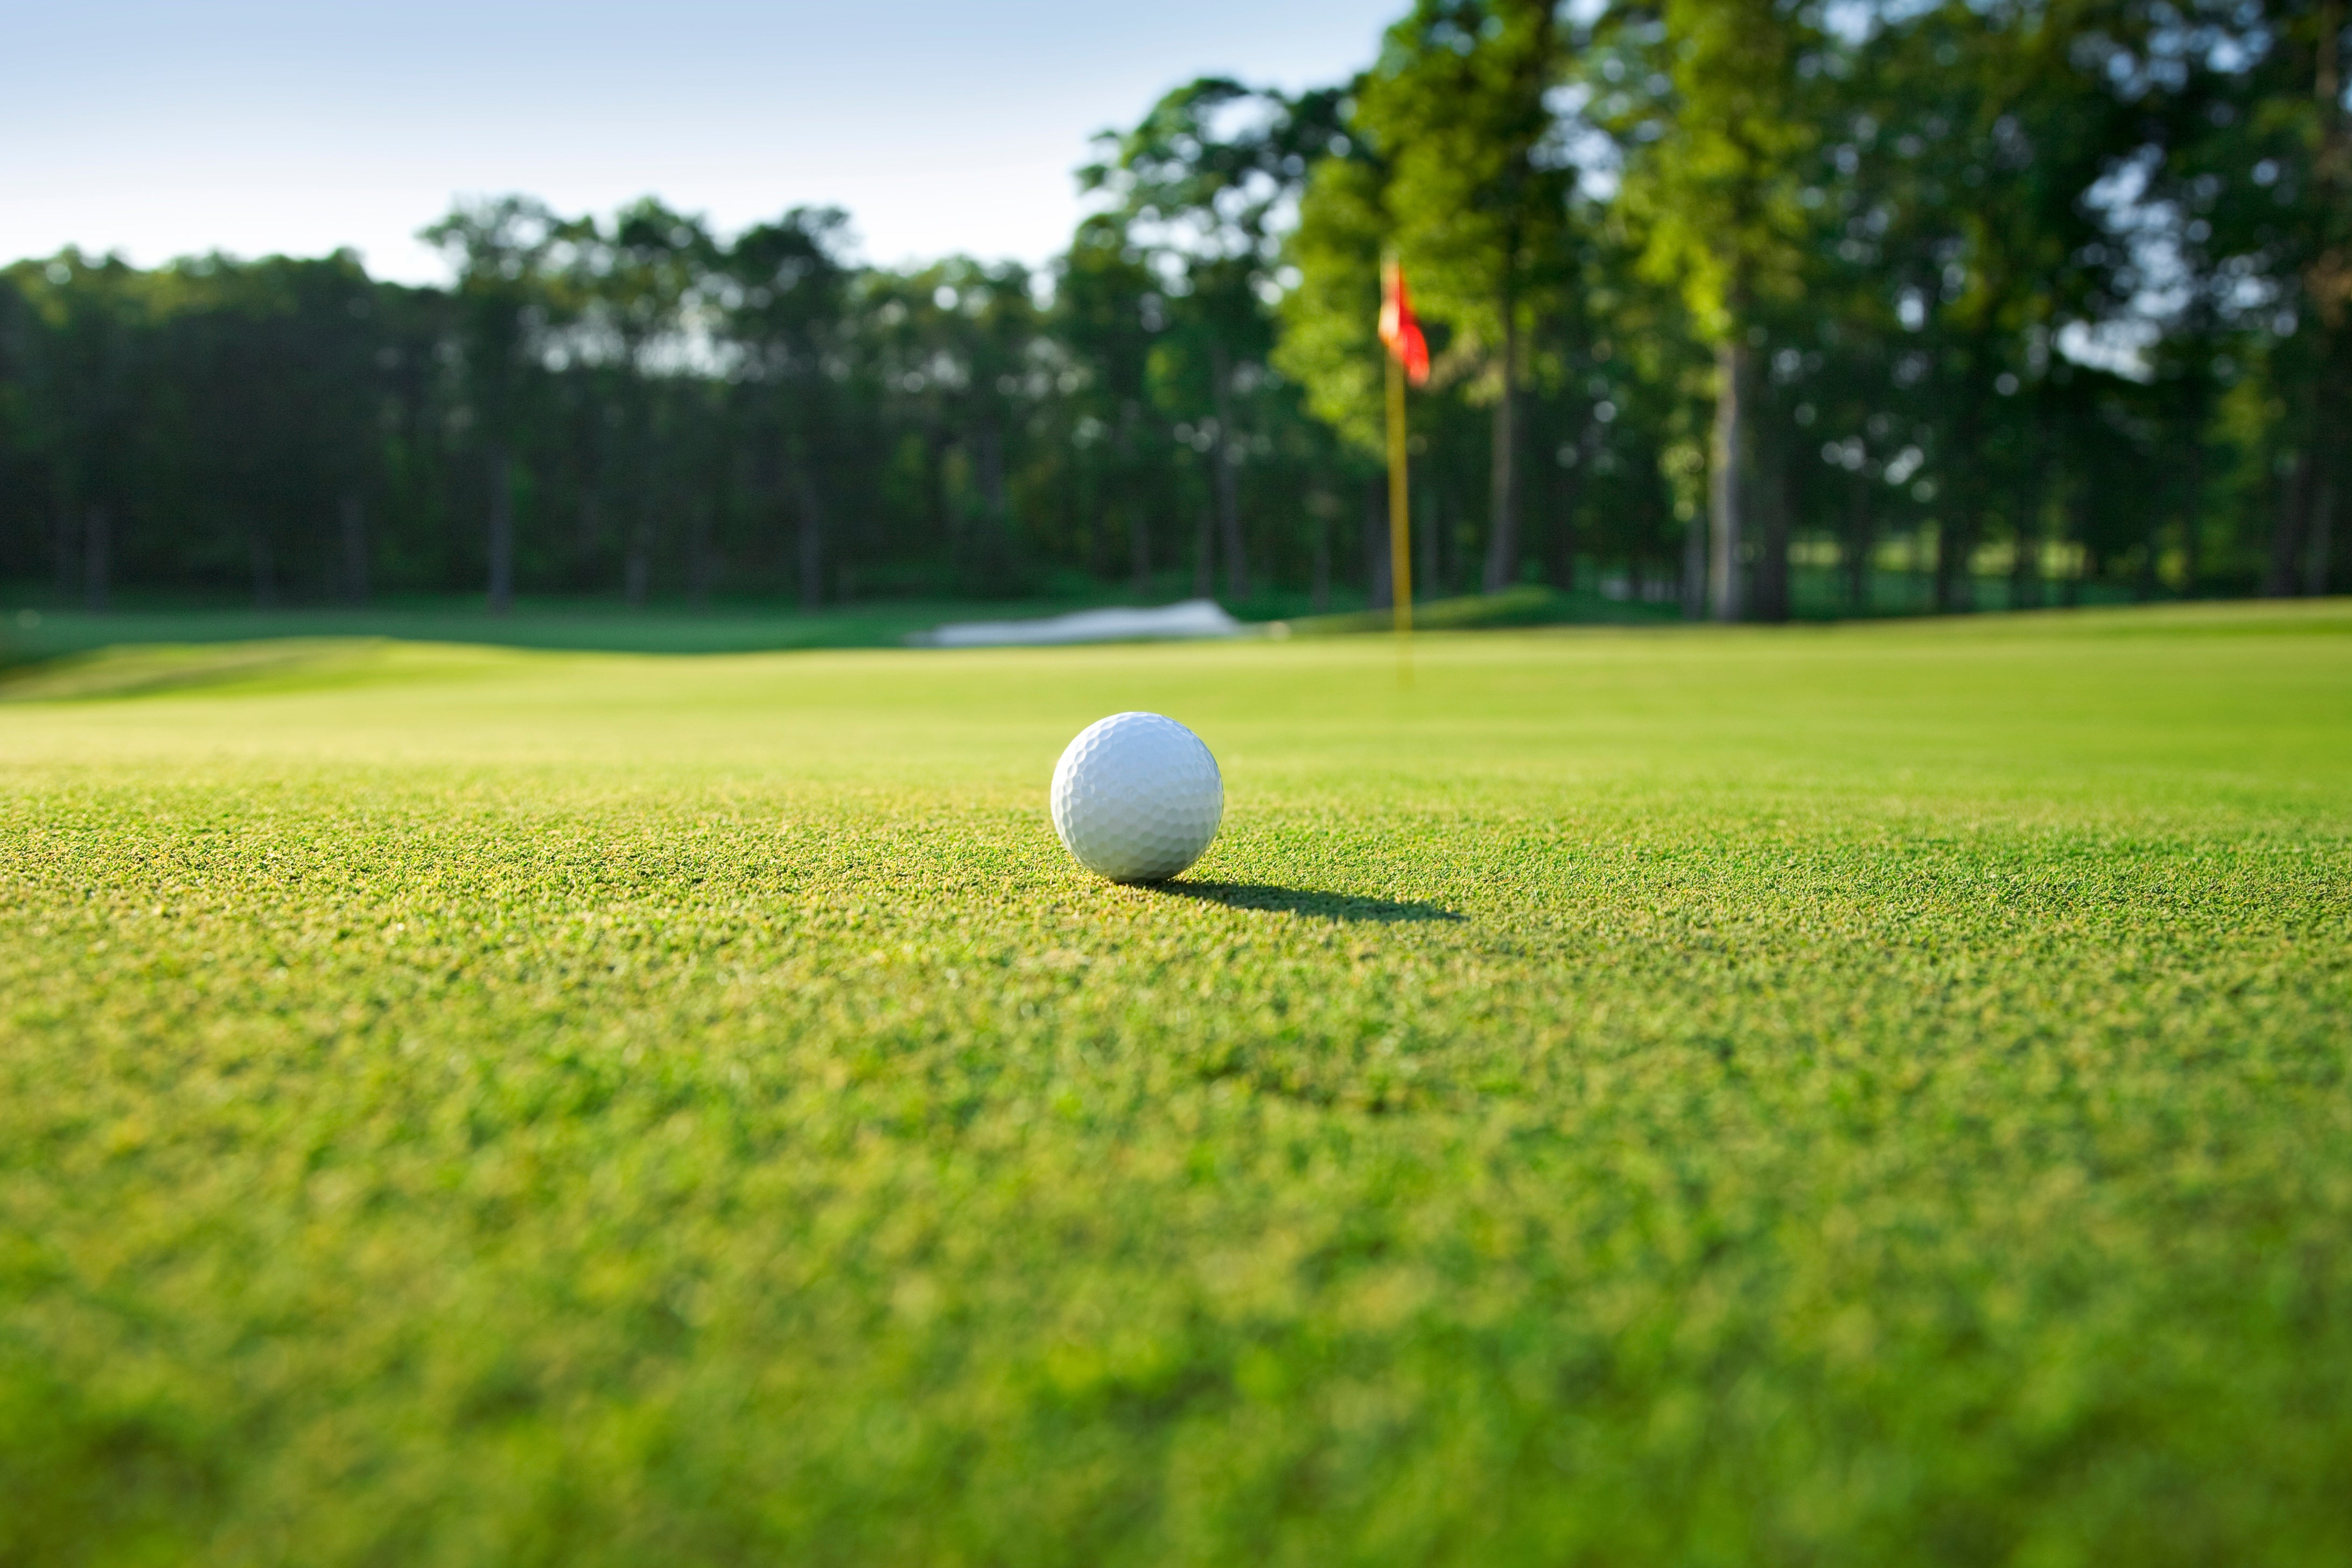 Golf Club Justifies Calling Police On Black Women, NAACP Head For ‘Playing Too Slowly’